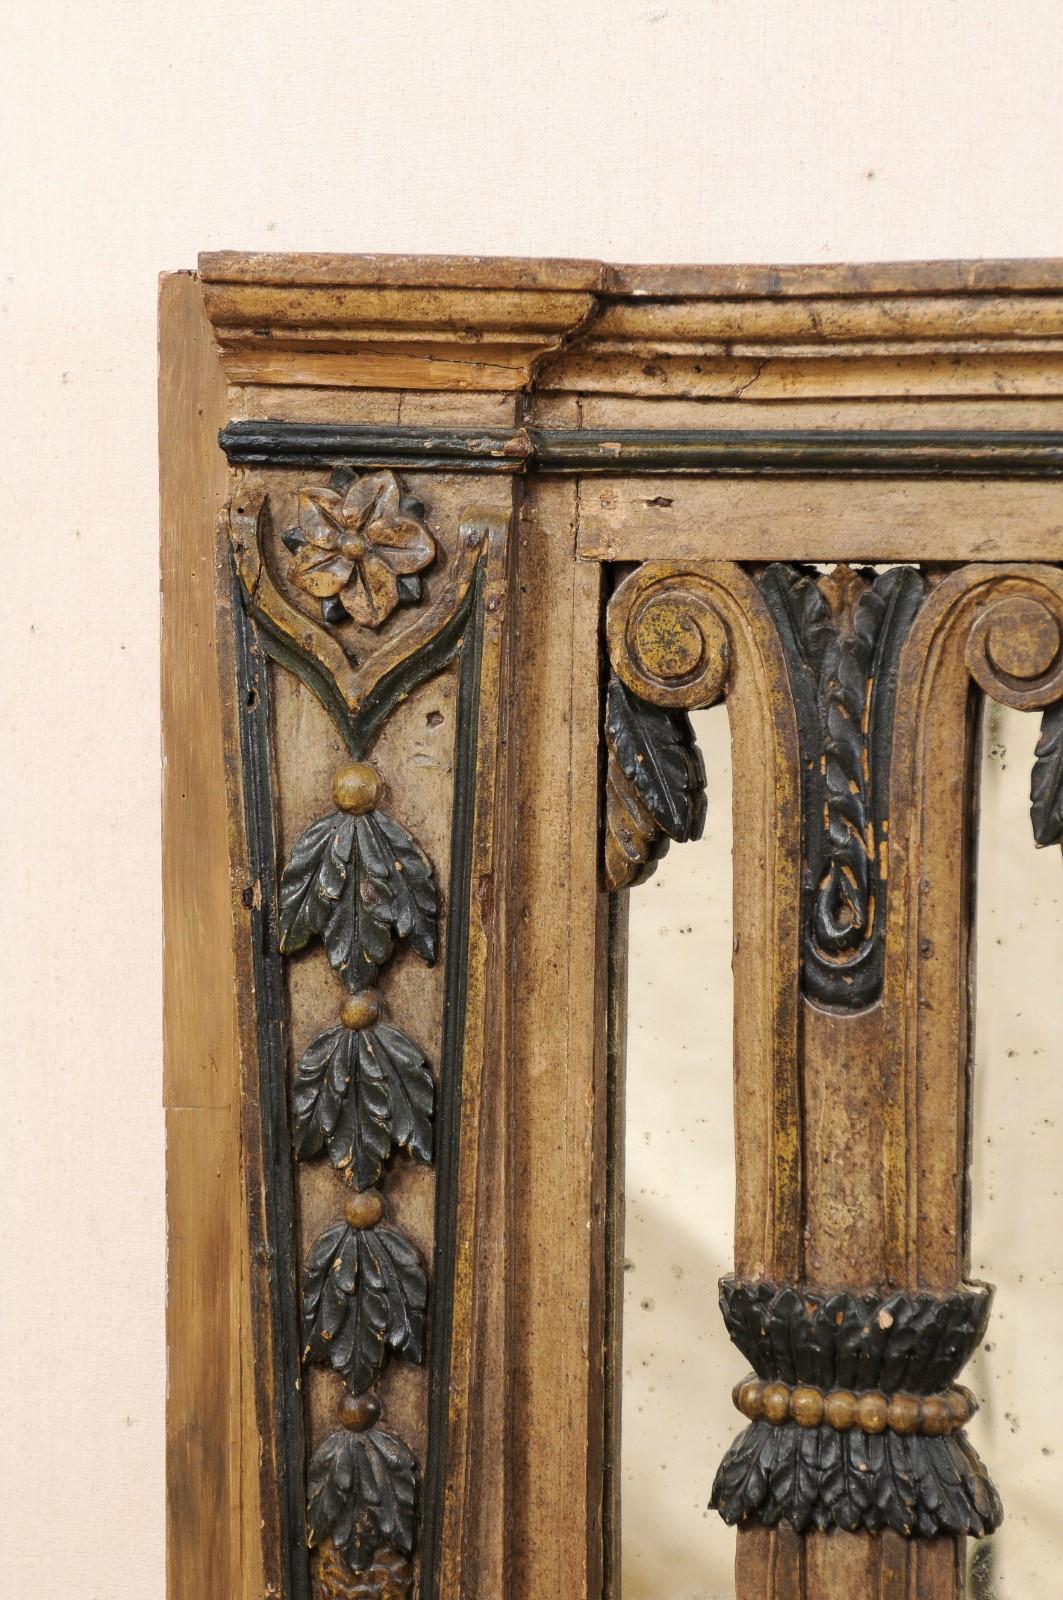 Hand-Carved Early 19th Century Portuguese Carved Wood Gate with Mirror at Backside For Sale